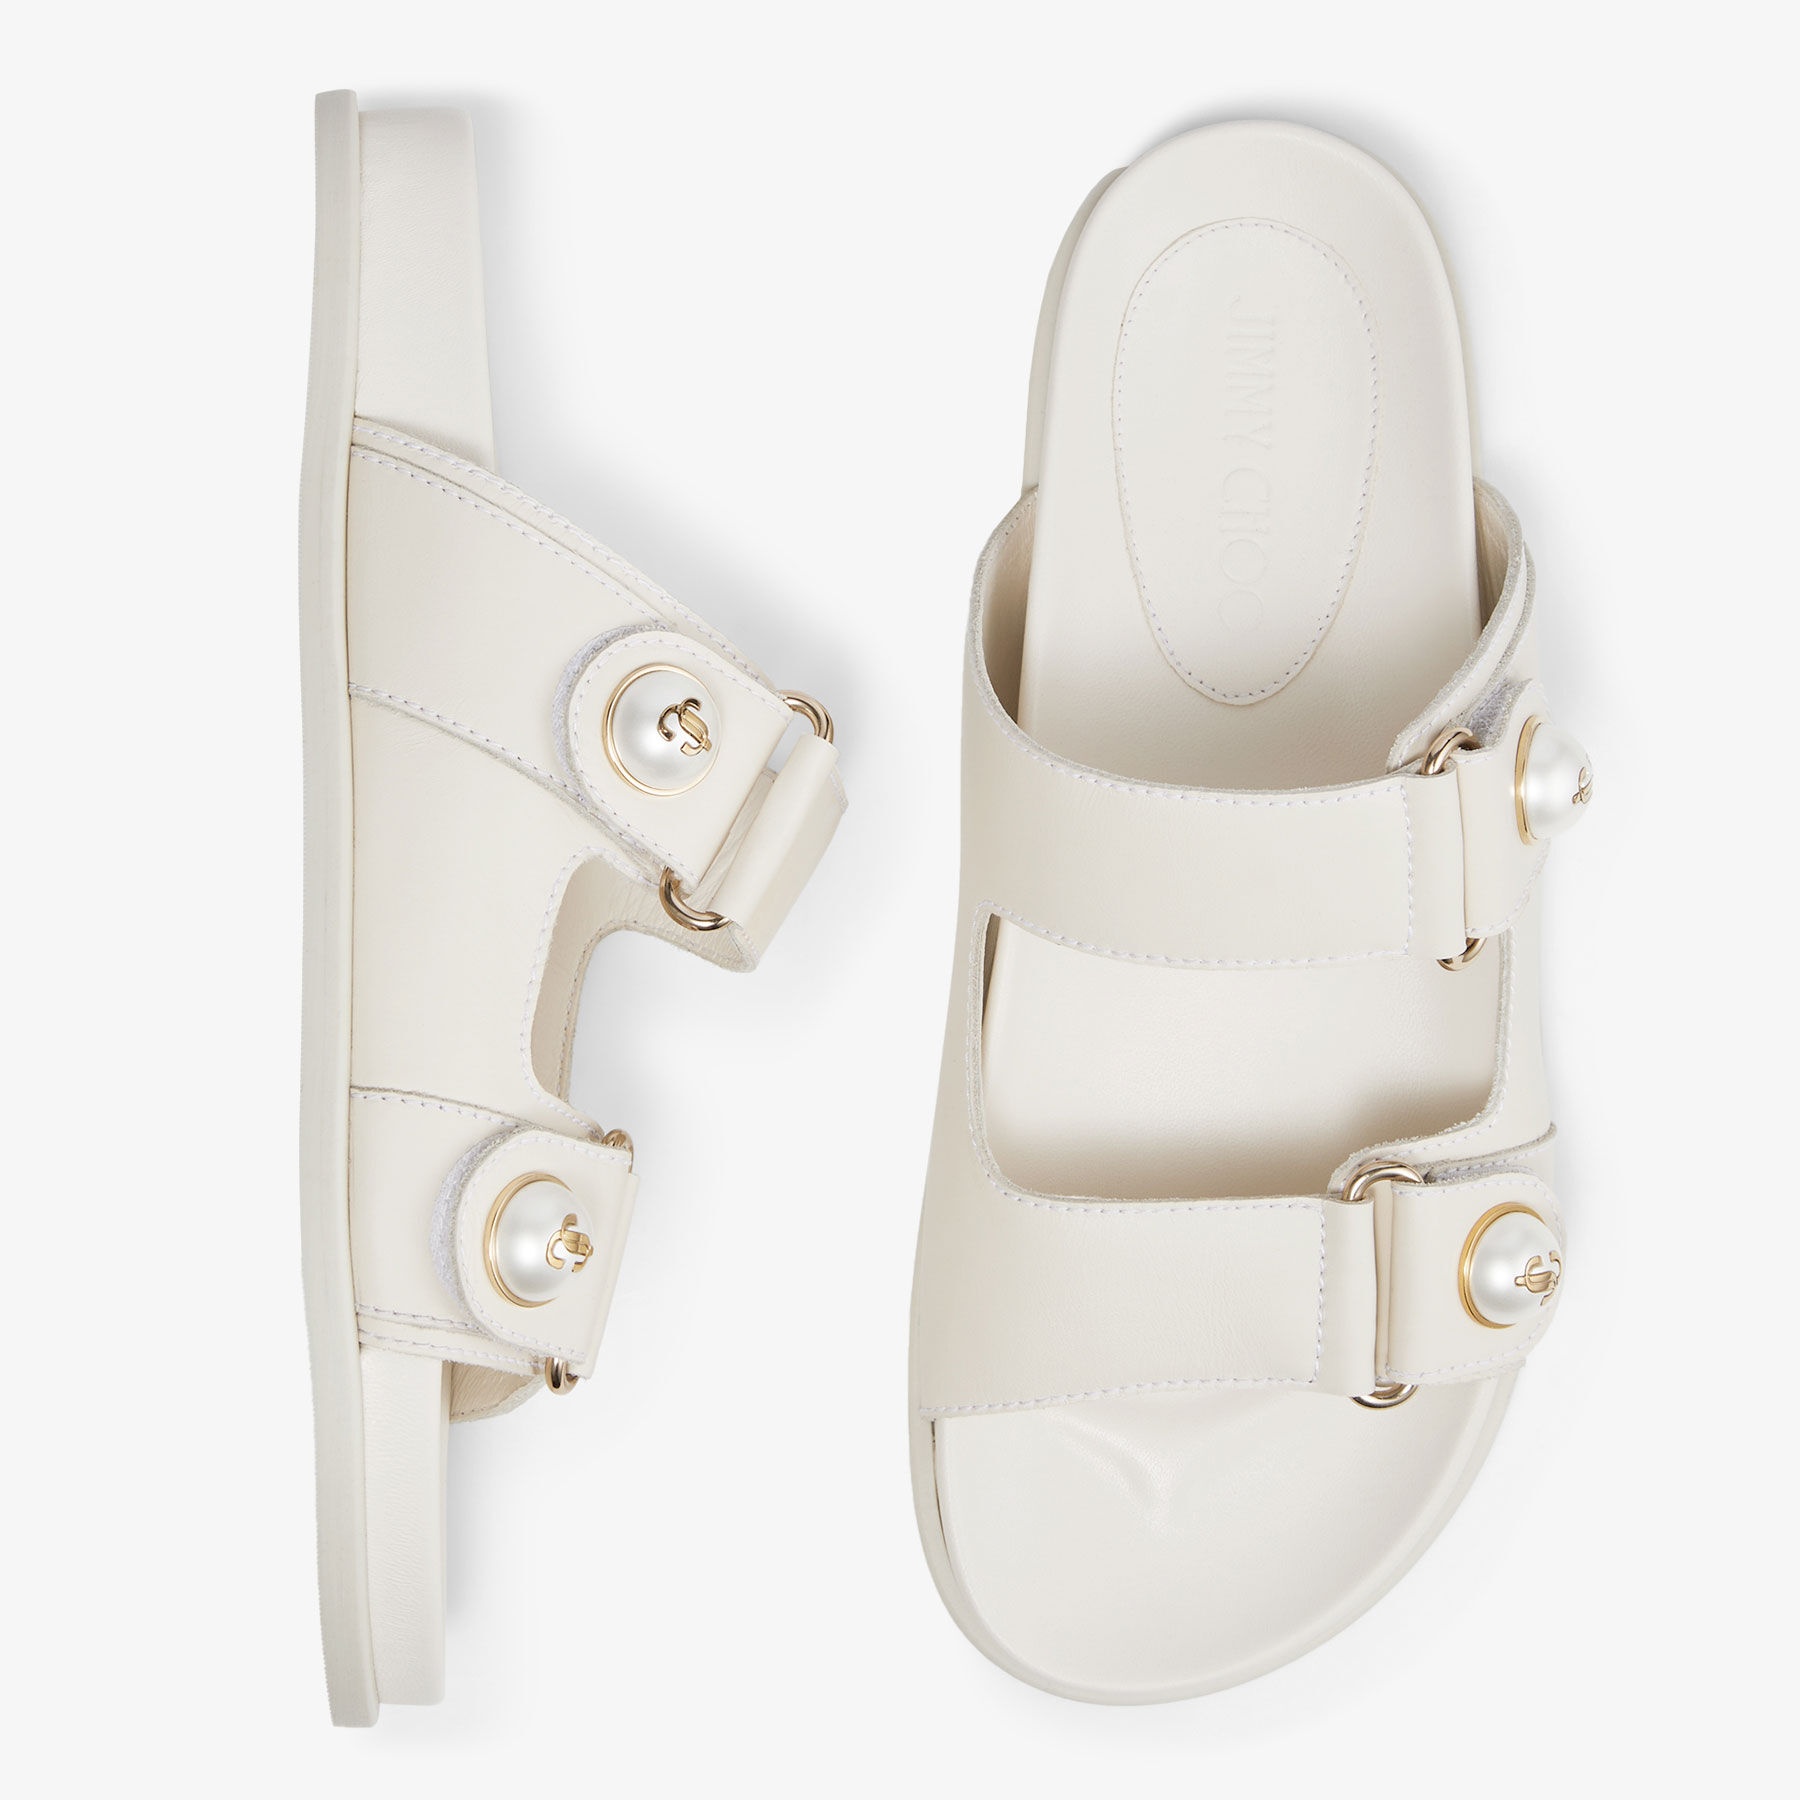 Fayence Sandal
Latte Leather Flat Sandals with Pearl Embellishment - 6